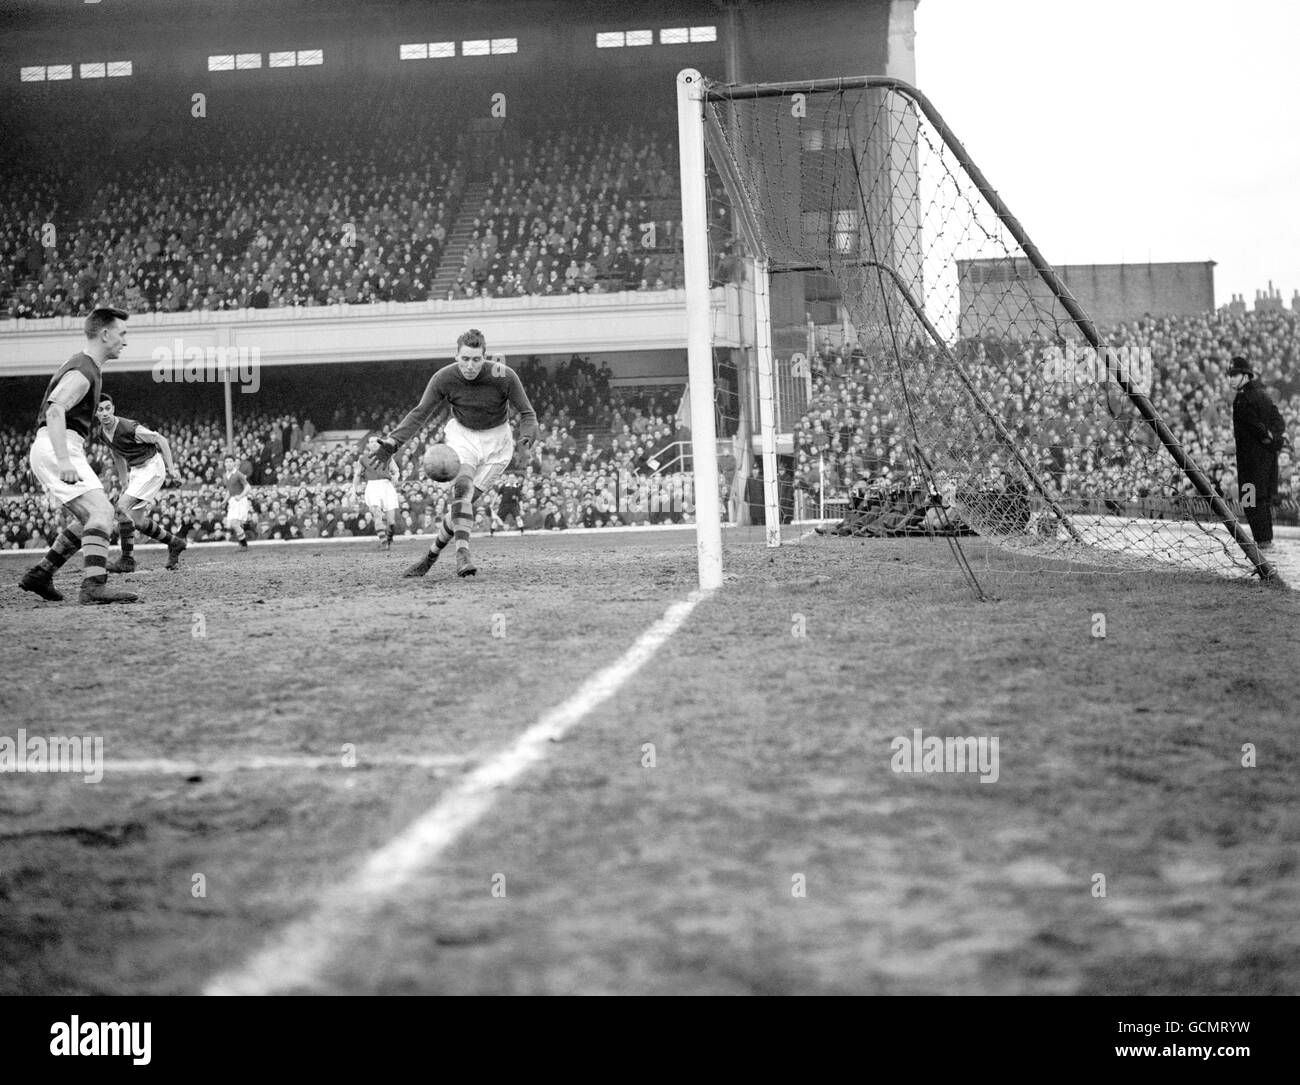 A near thing for Burnley, as McDonald the Burnley goalkeeper is beaten by a shot from Saunders the Chelsea left half, which hit the post and rebound into play. Stock Photo